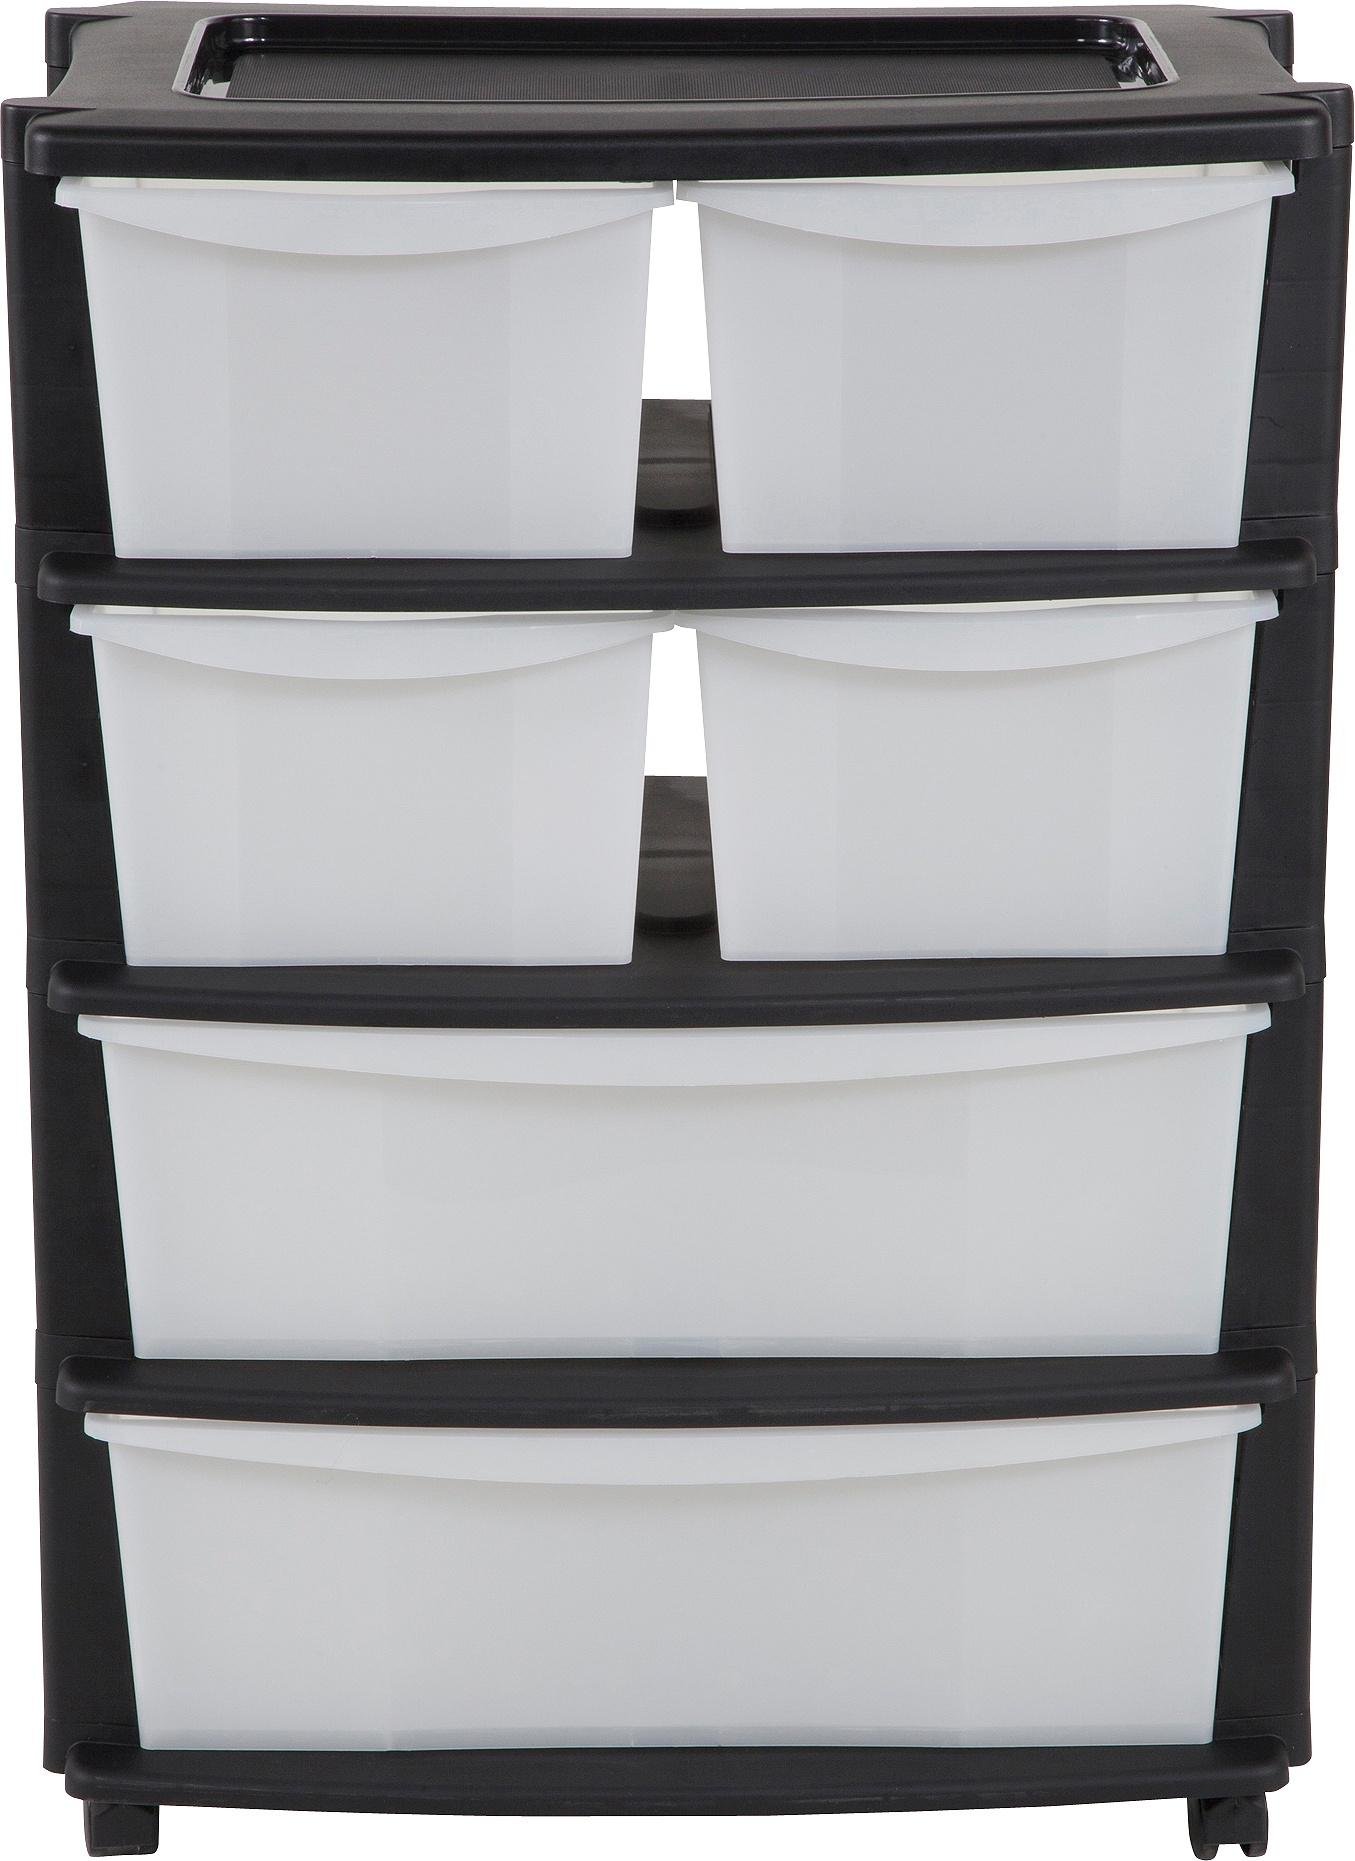 HOME 6 Drawer Black Plastic Wide Tower Storage Unit Review